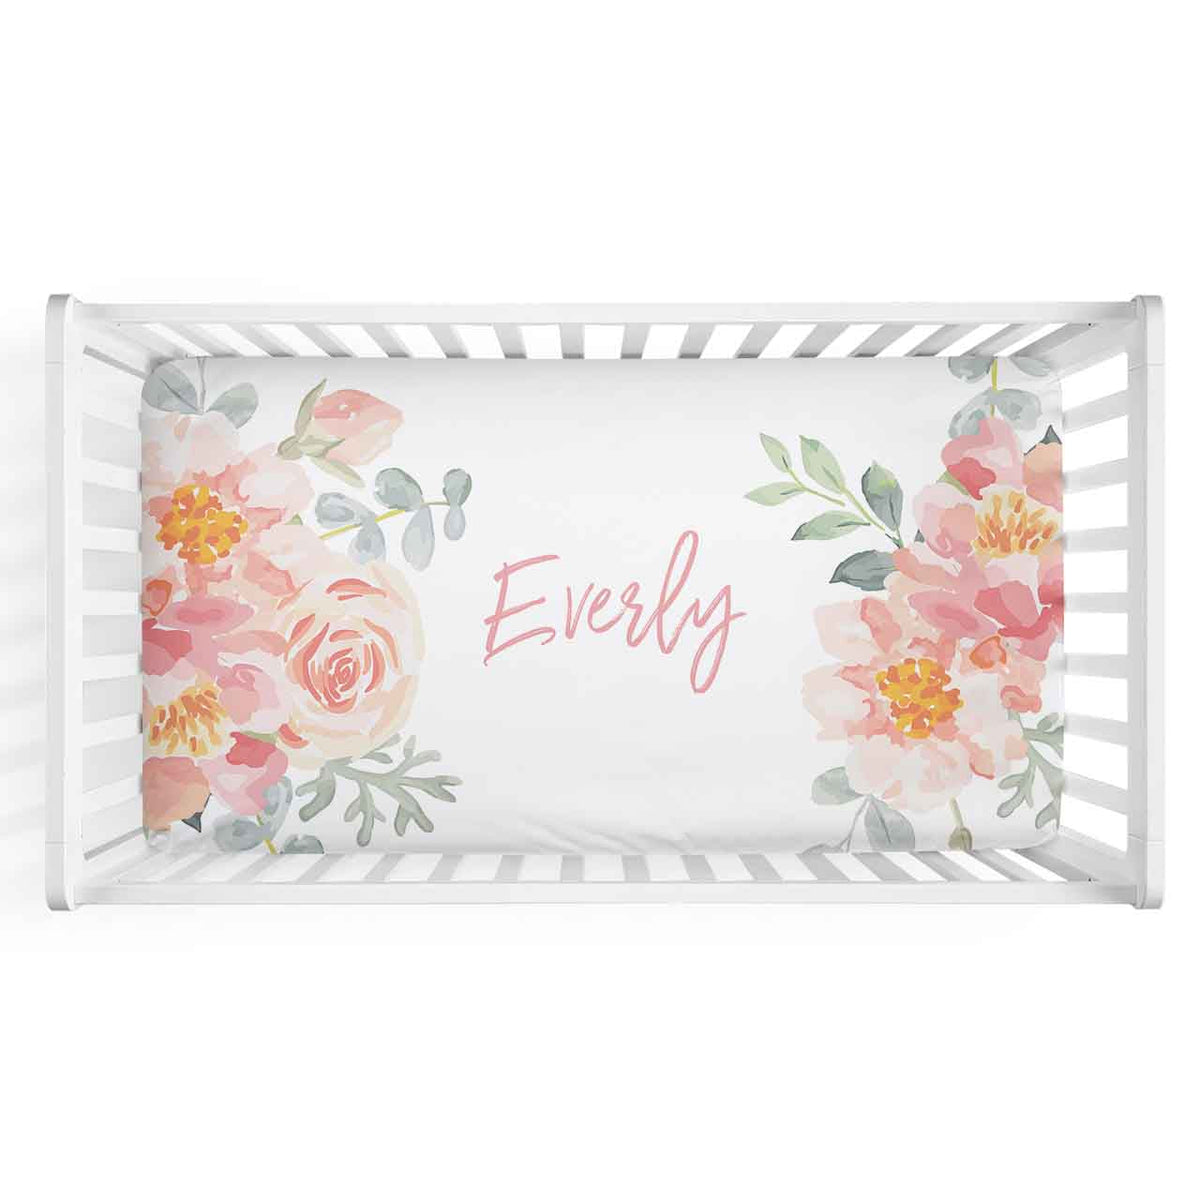 Ella's Dusty Rose Vintage Floral Personalized Crib Sheet